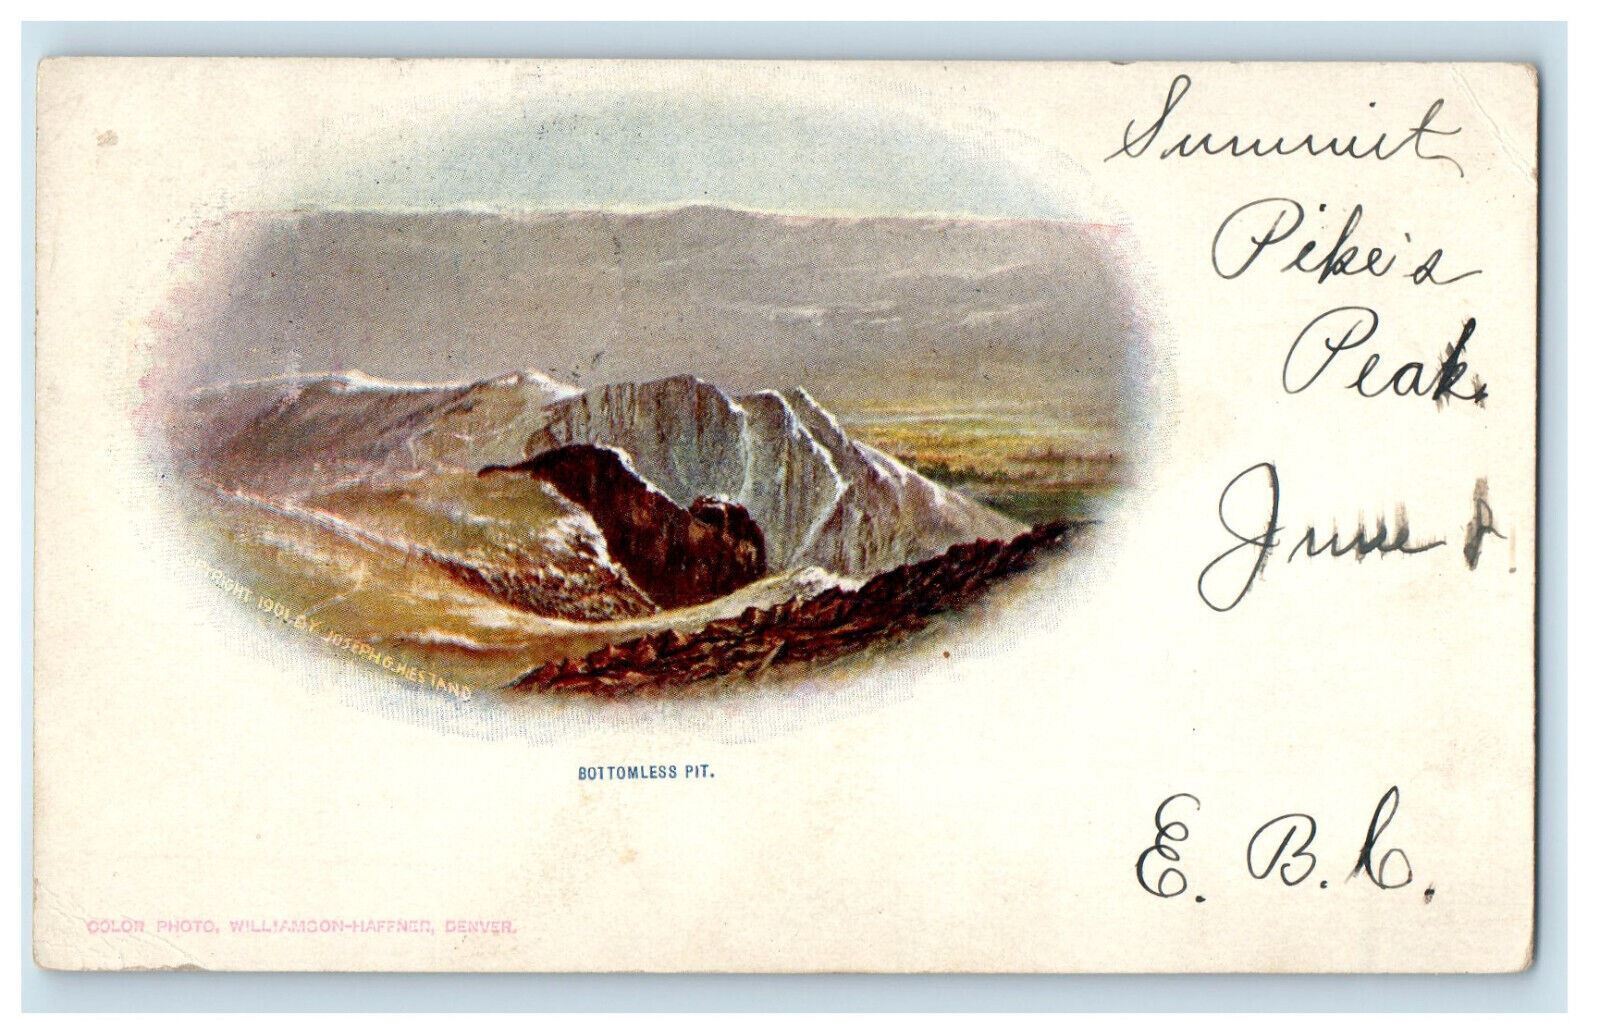 1902 Bottomless Pit, Summit Pike's Peak Stamp PMC Antique Posted Postcard